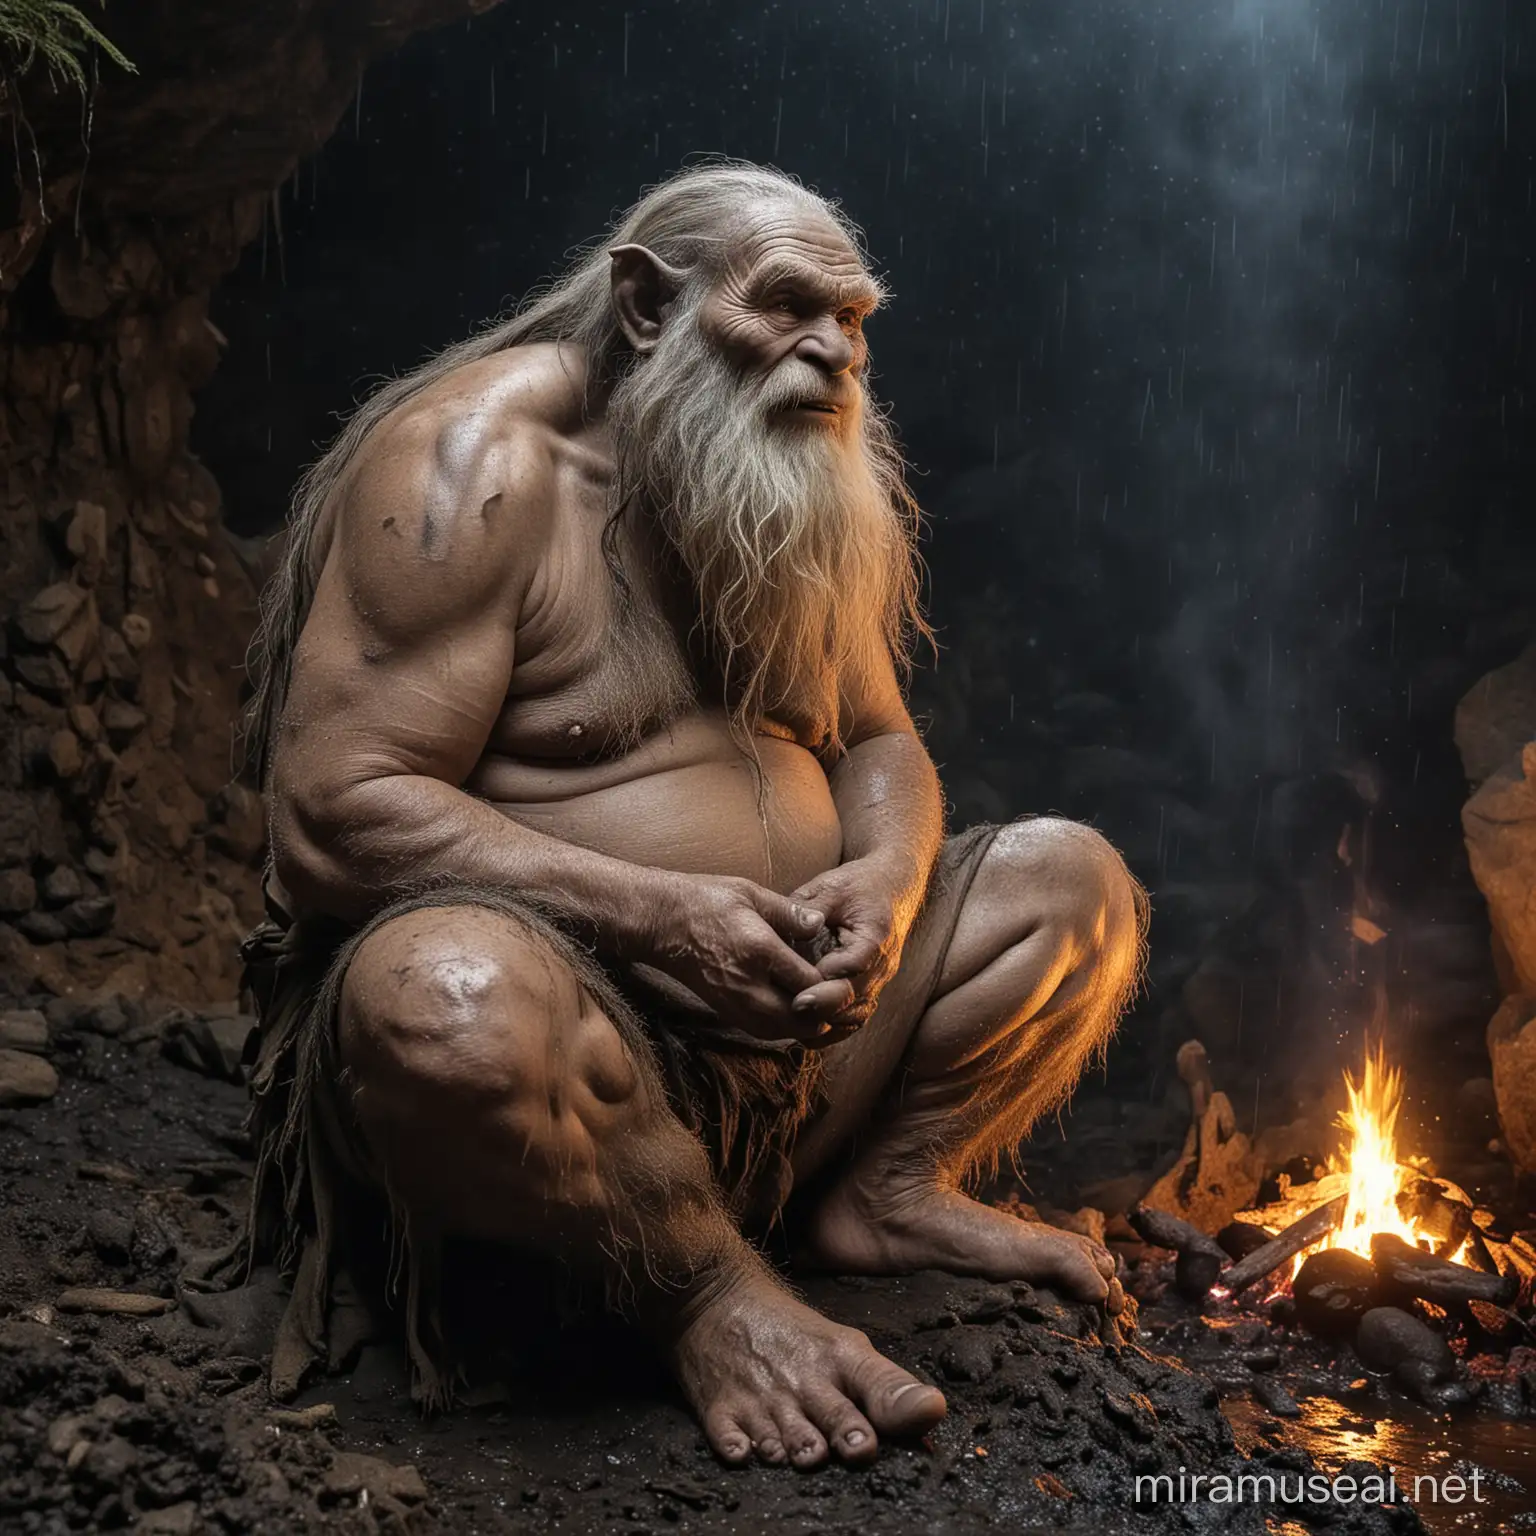 Elderly Troll Sitting by Midnight Bonfire in Rainy Forest Cave